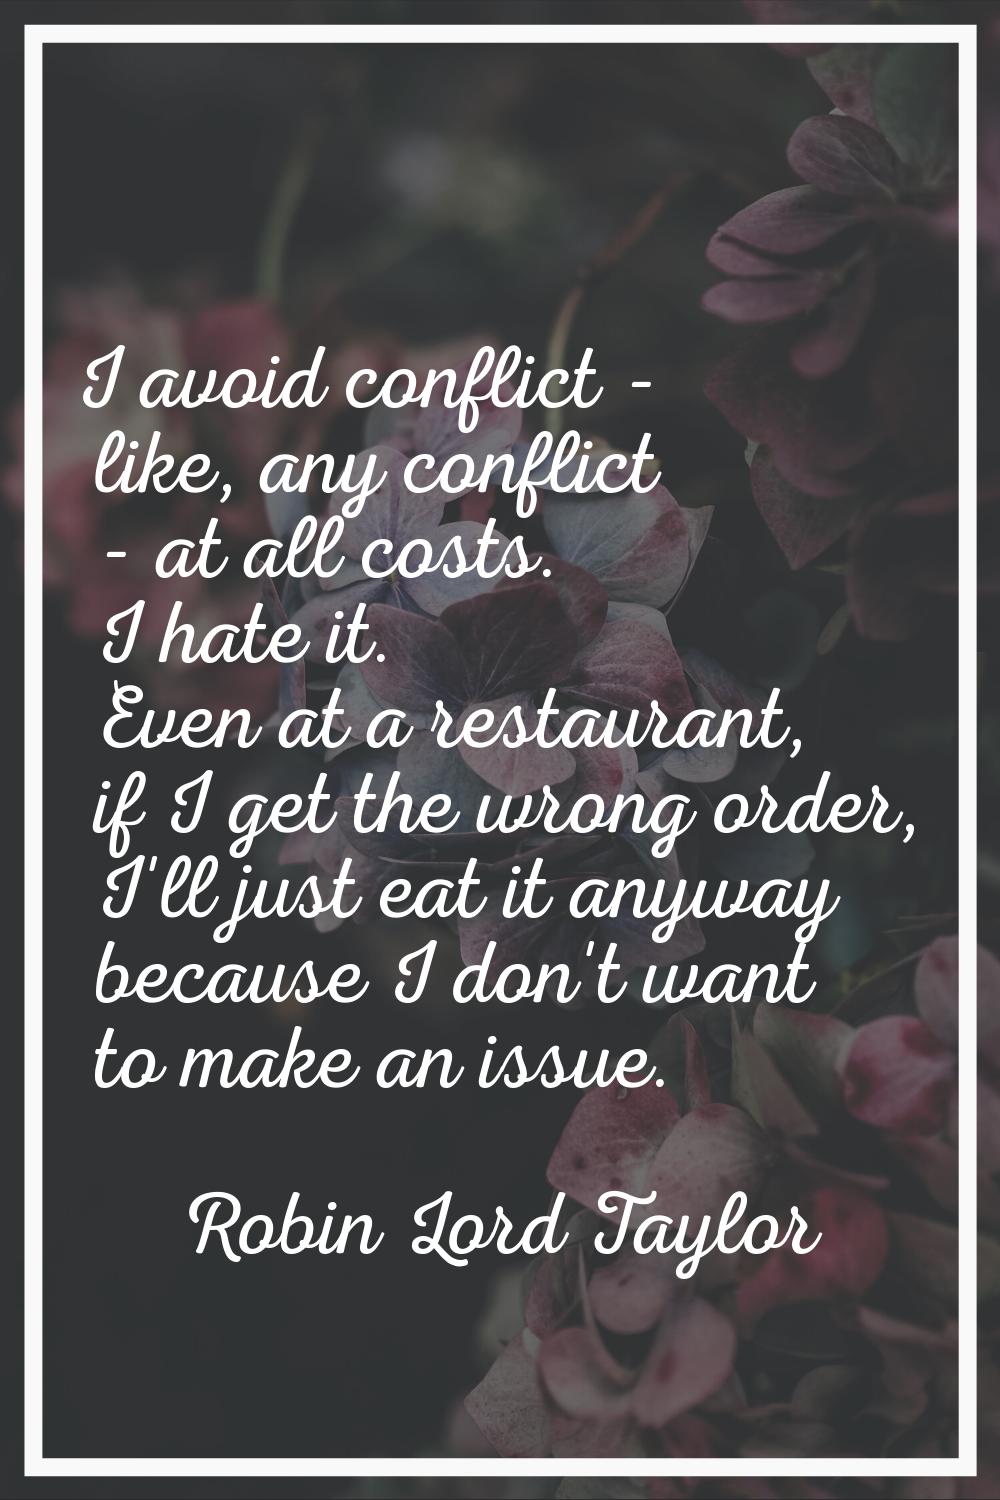 I avoid conflict - like, any conflict - at all costs. I hate it. Even at a restaurant, if I get the